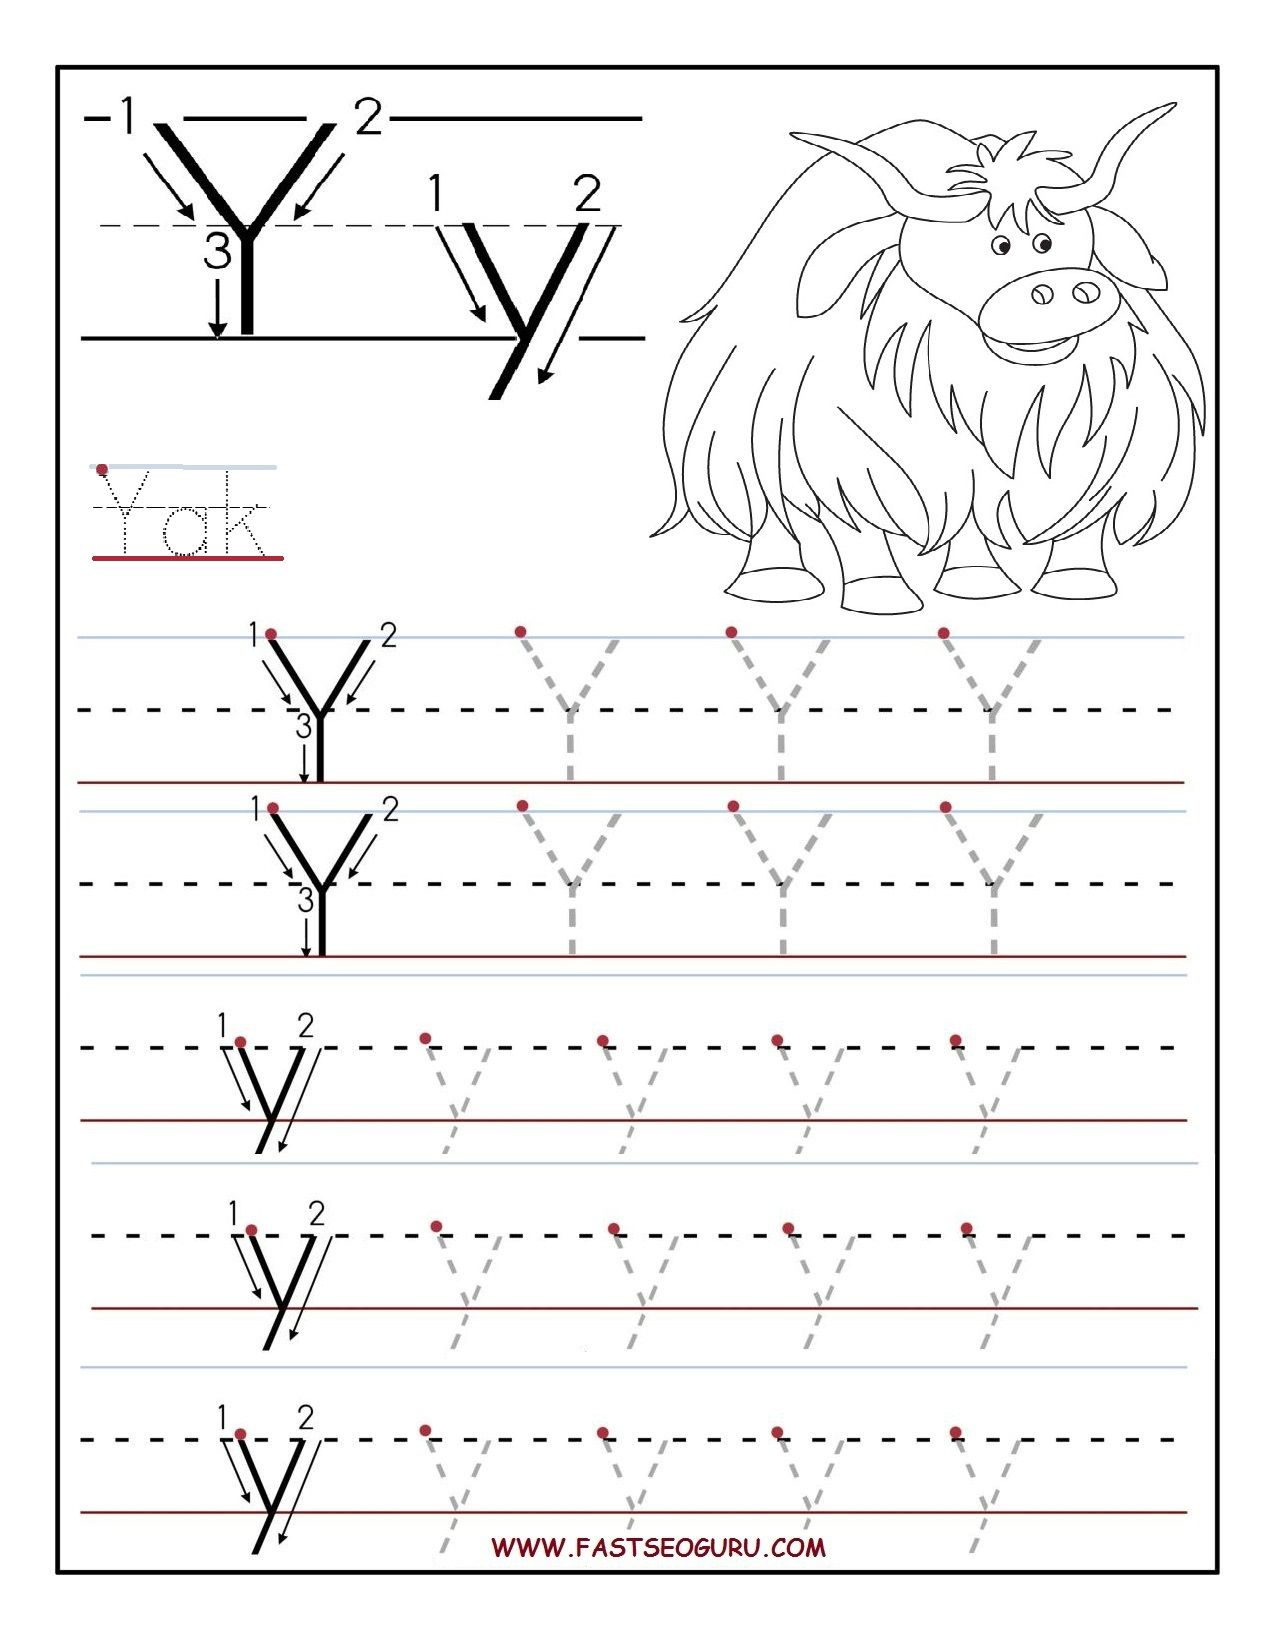 Printable Letter Y Tracing Worksheets For Preschool for Letter Tracing Y